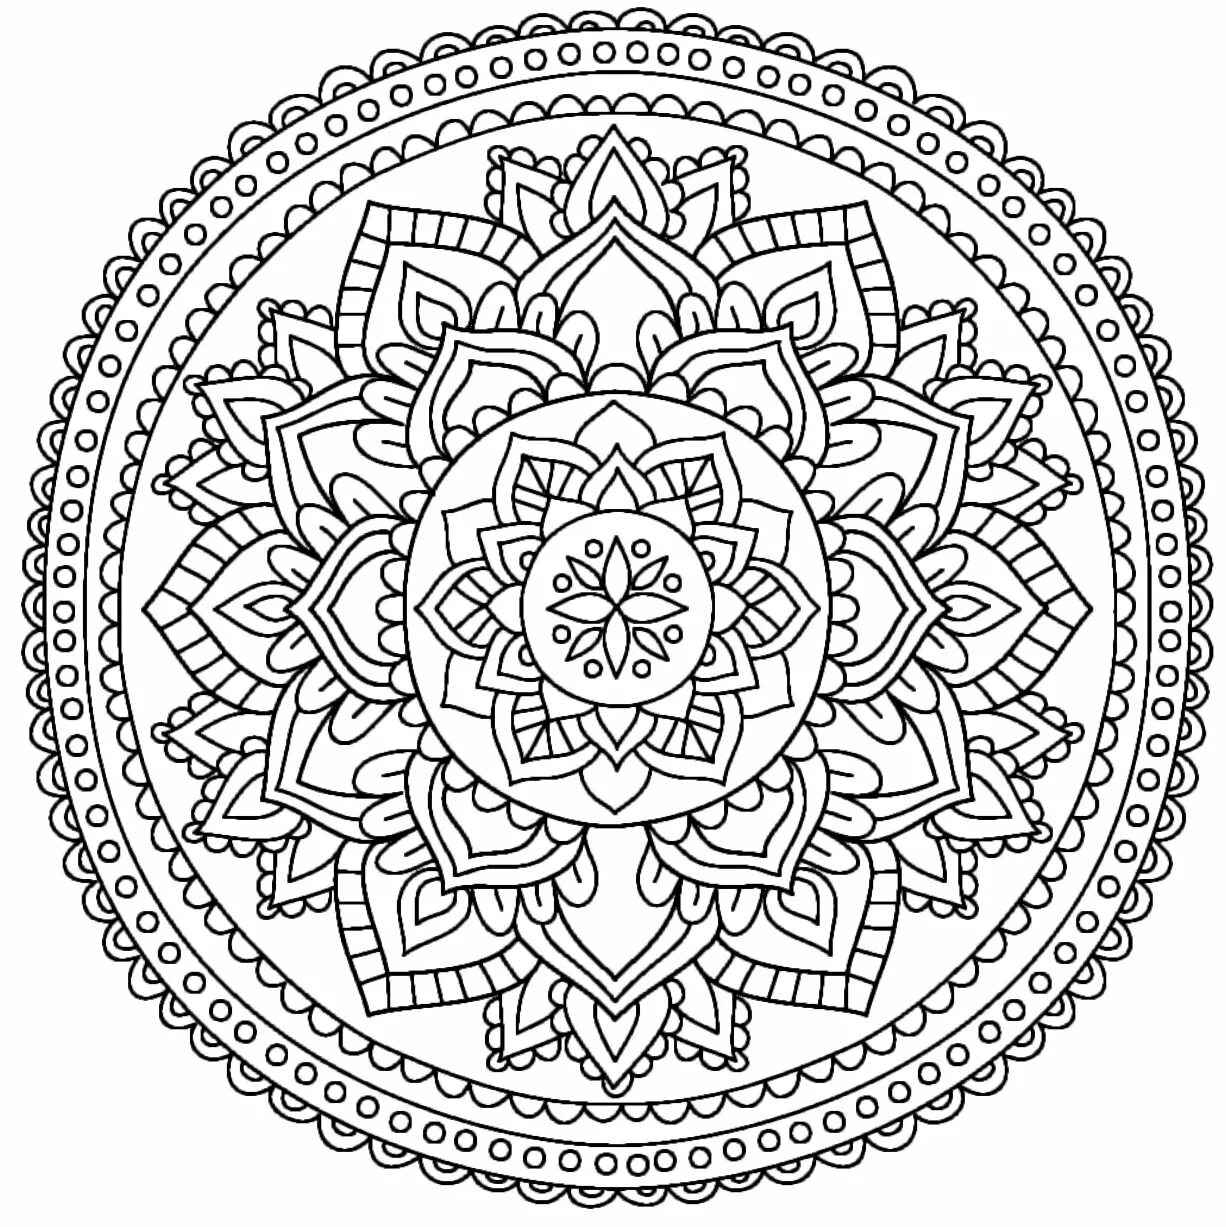 Glitter coloring mandala for good luck and prosperity